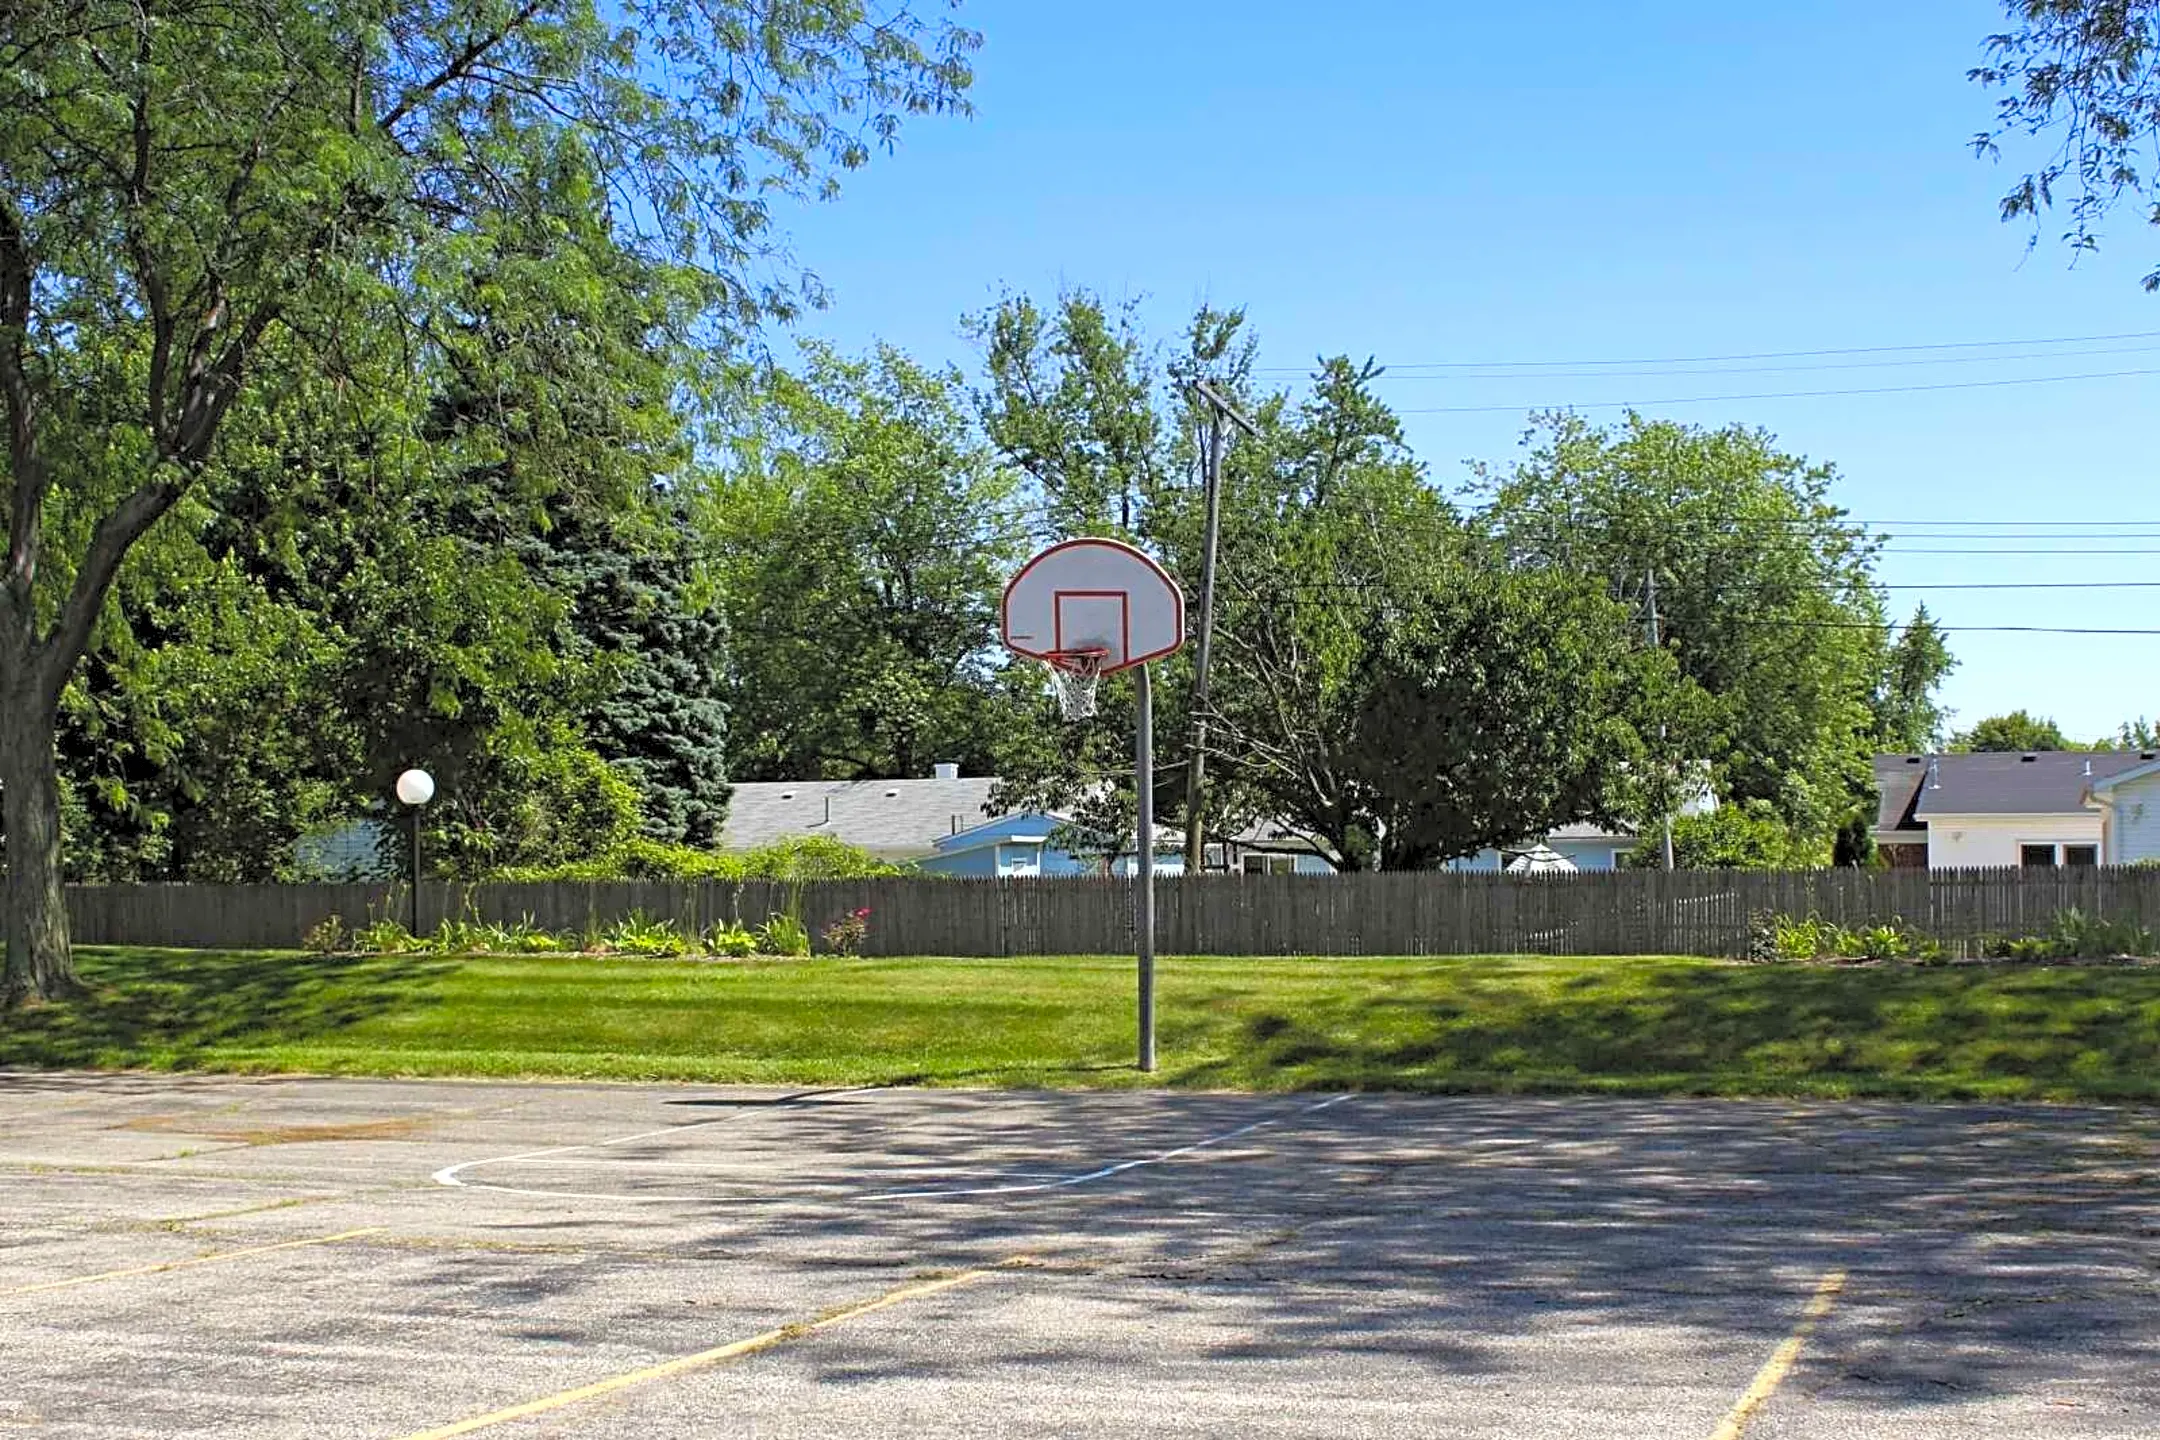 Basketball Court - Lake View Shores - Maumee, OH